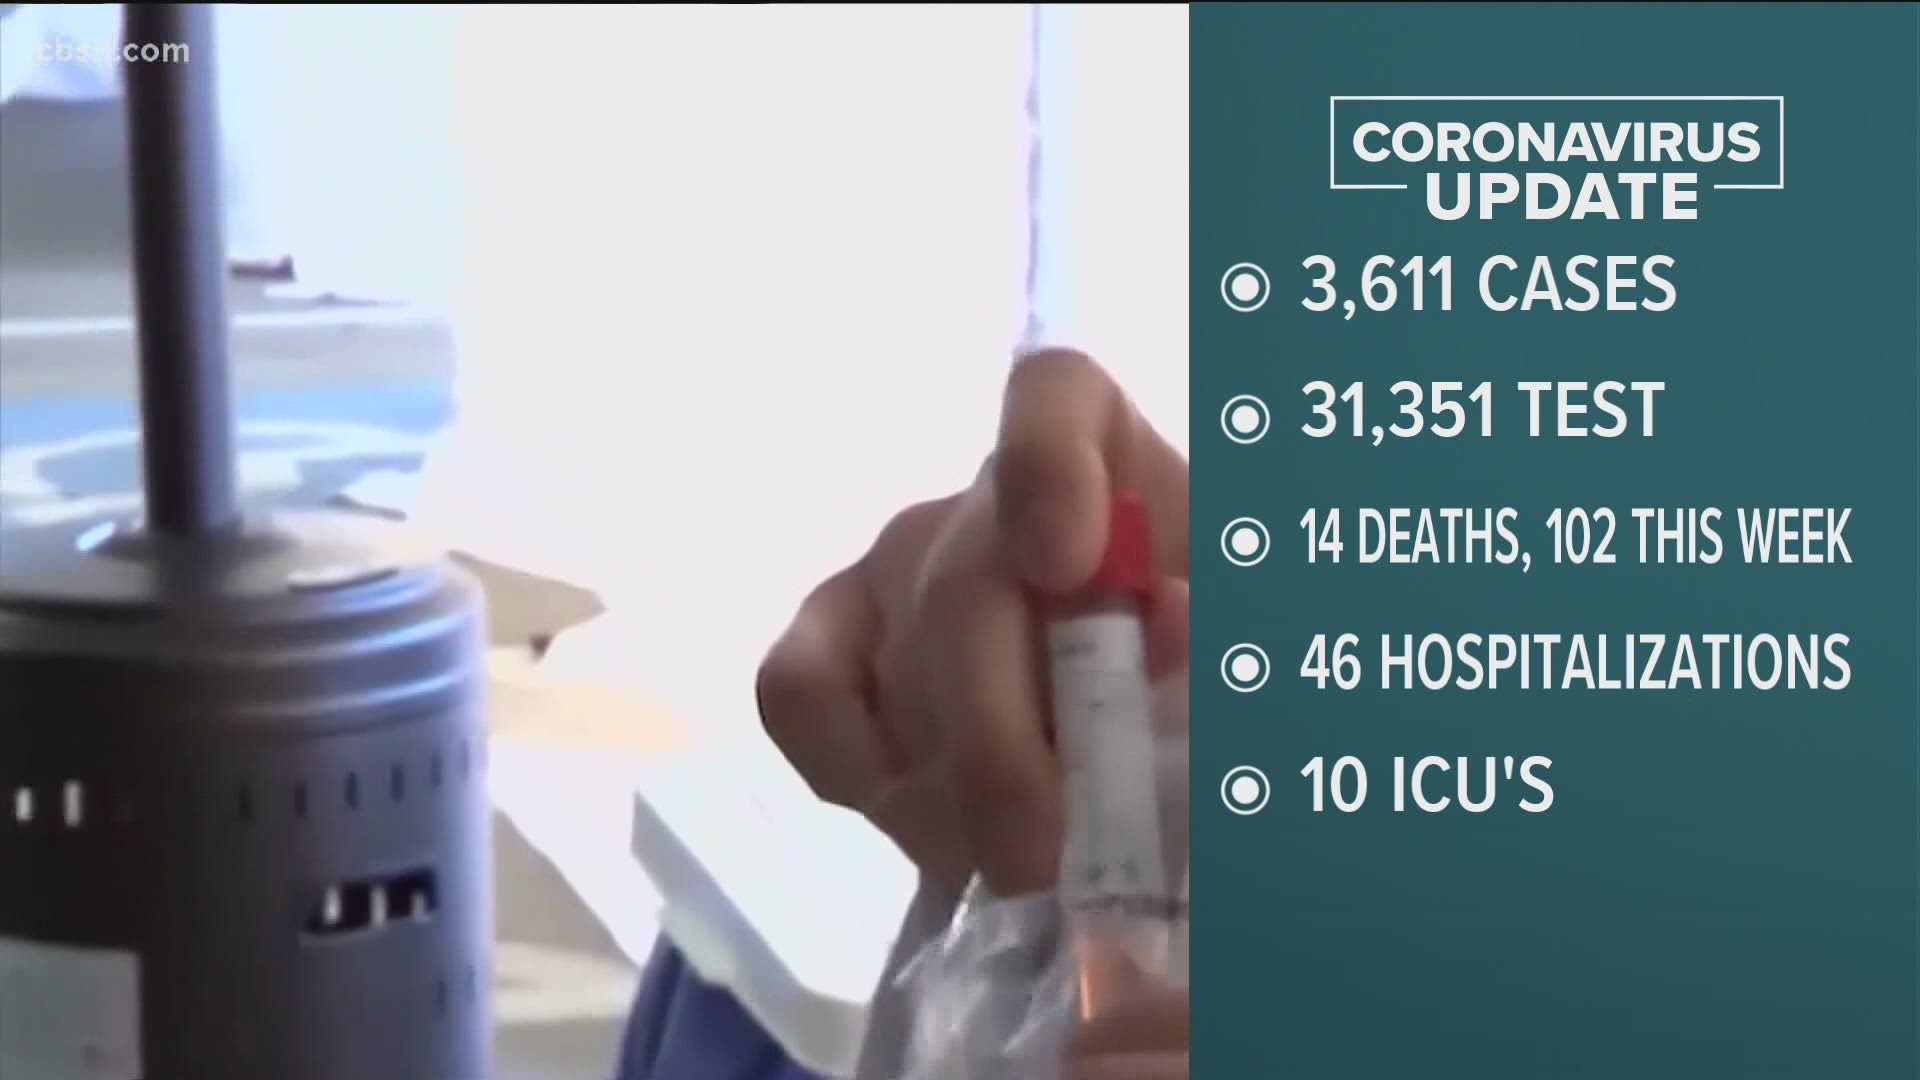 The recent surge in COVID-19 cases across San Diego County is testing local health care professionals like never before with hospital ICU's at or near capacity.